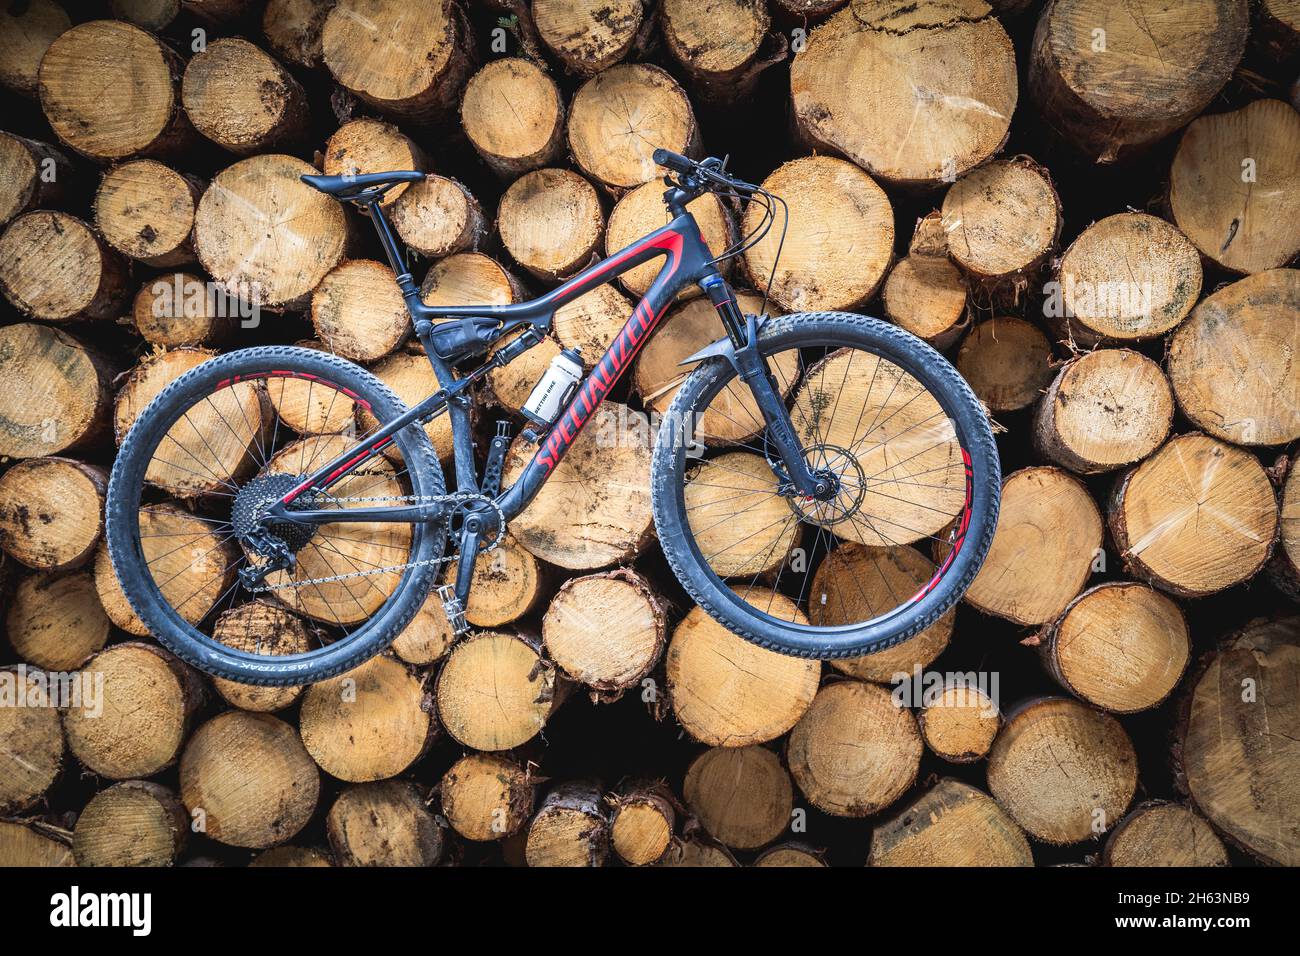 mountain bike,side view,hanging from a pile of logs Stock Photo